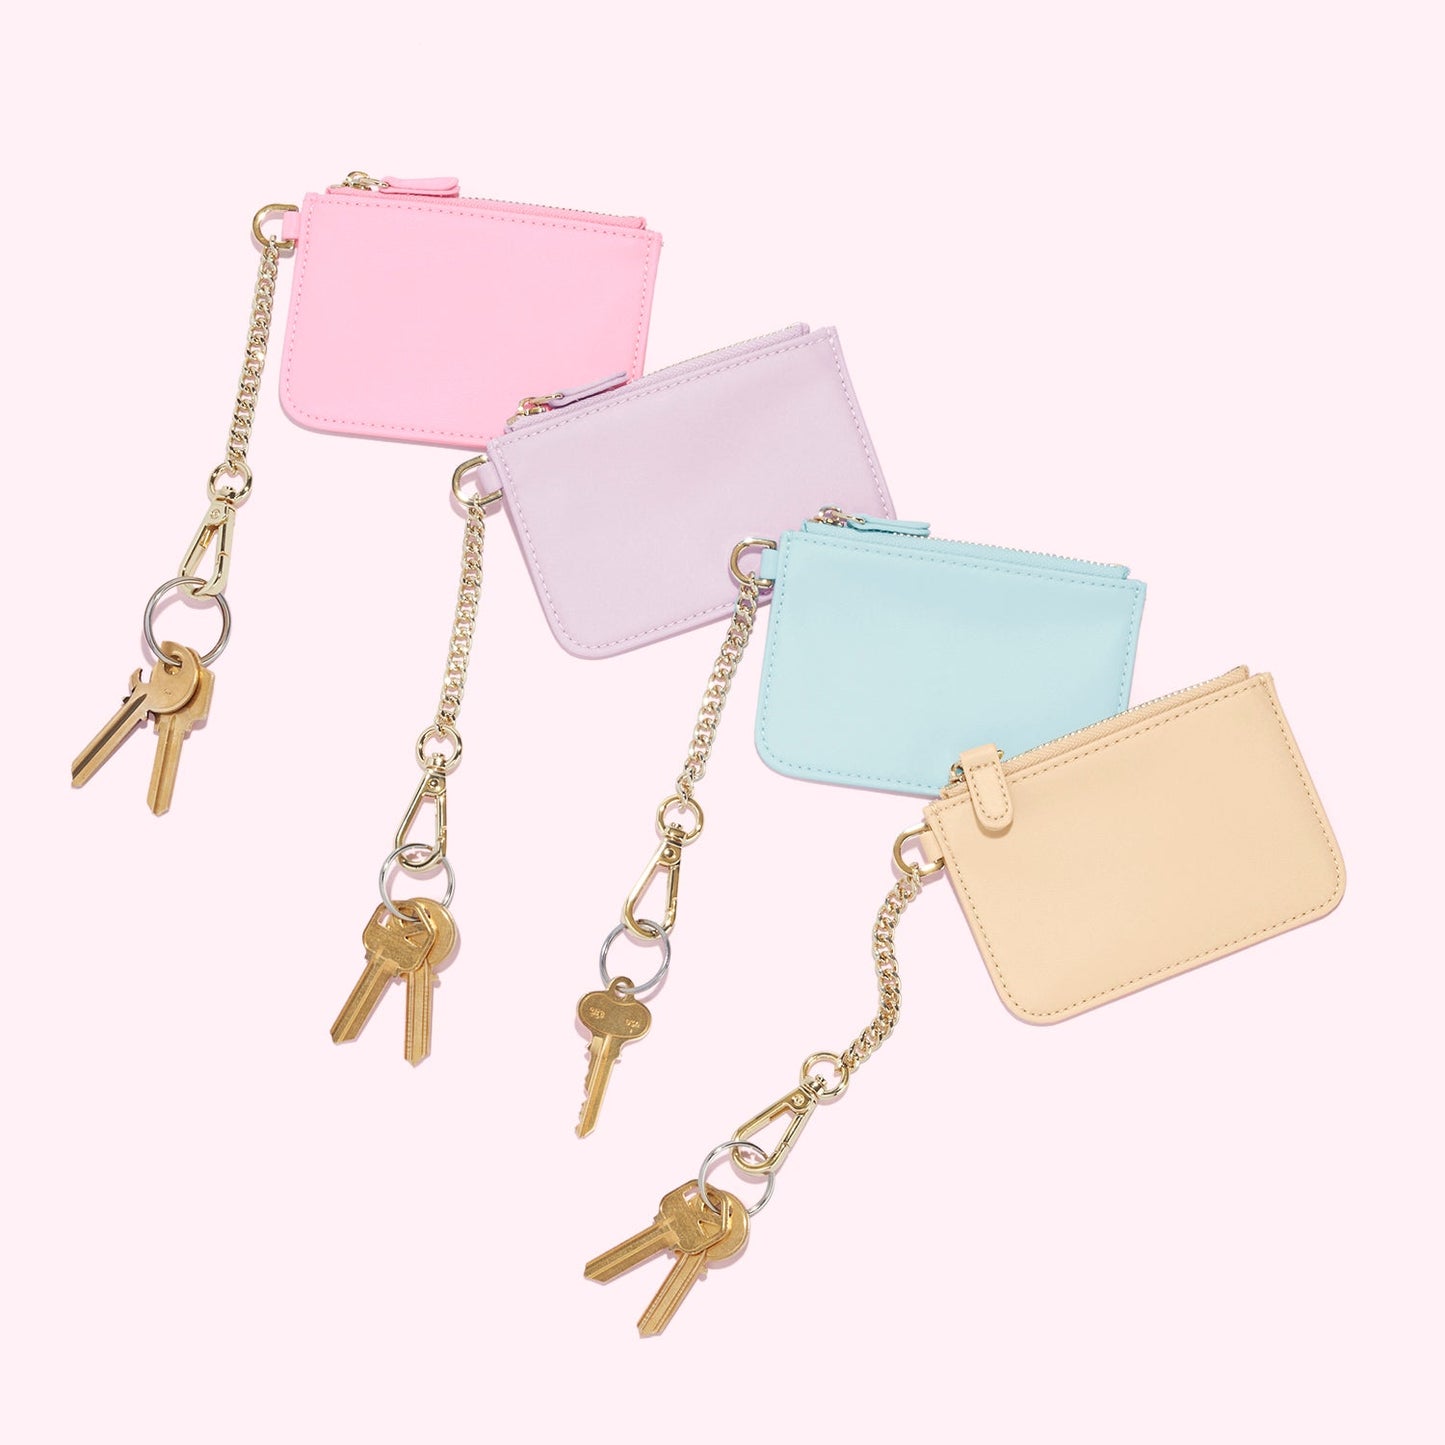 11 Keychain Wallets For When You Just Need the Essentials - Fashionista